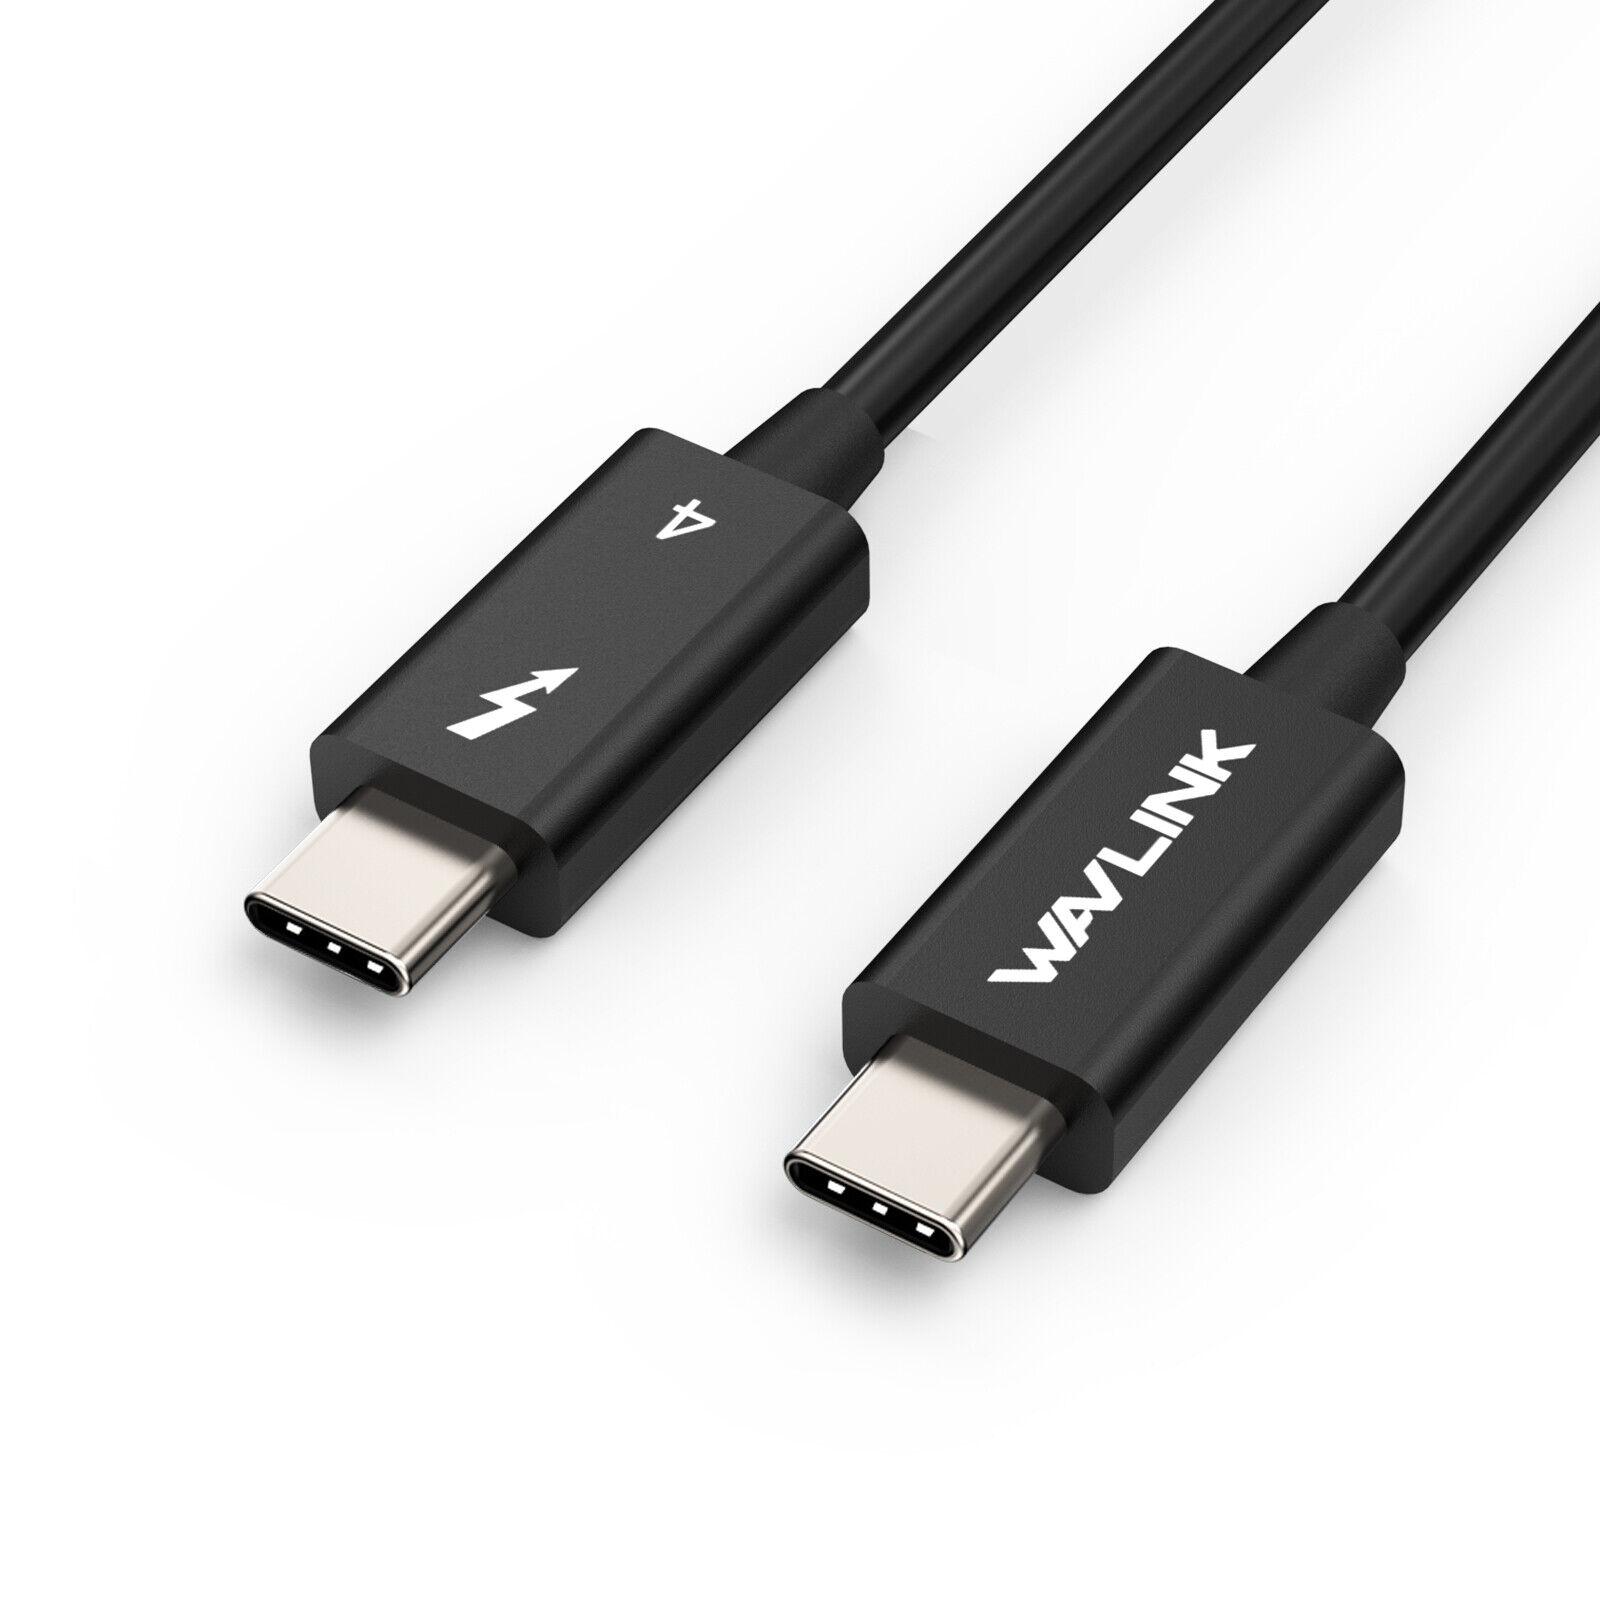 WAVLINK Thunderbolt 4 Cable 3.3ft 240W 8K Dual 4K Display 40Gbps Transfer